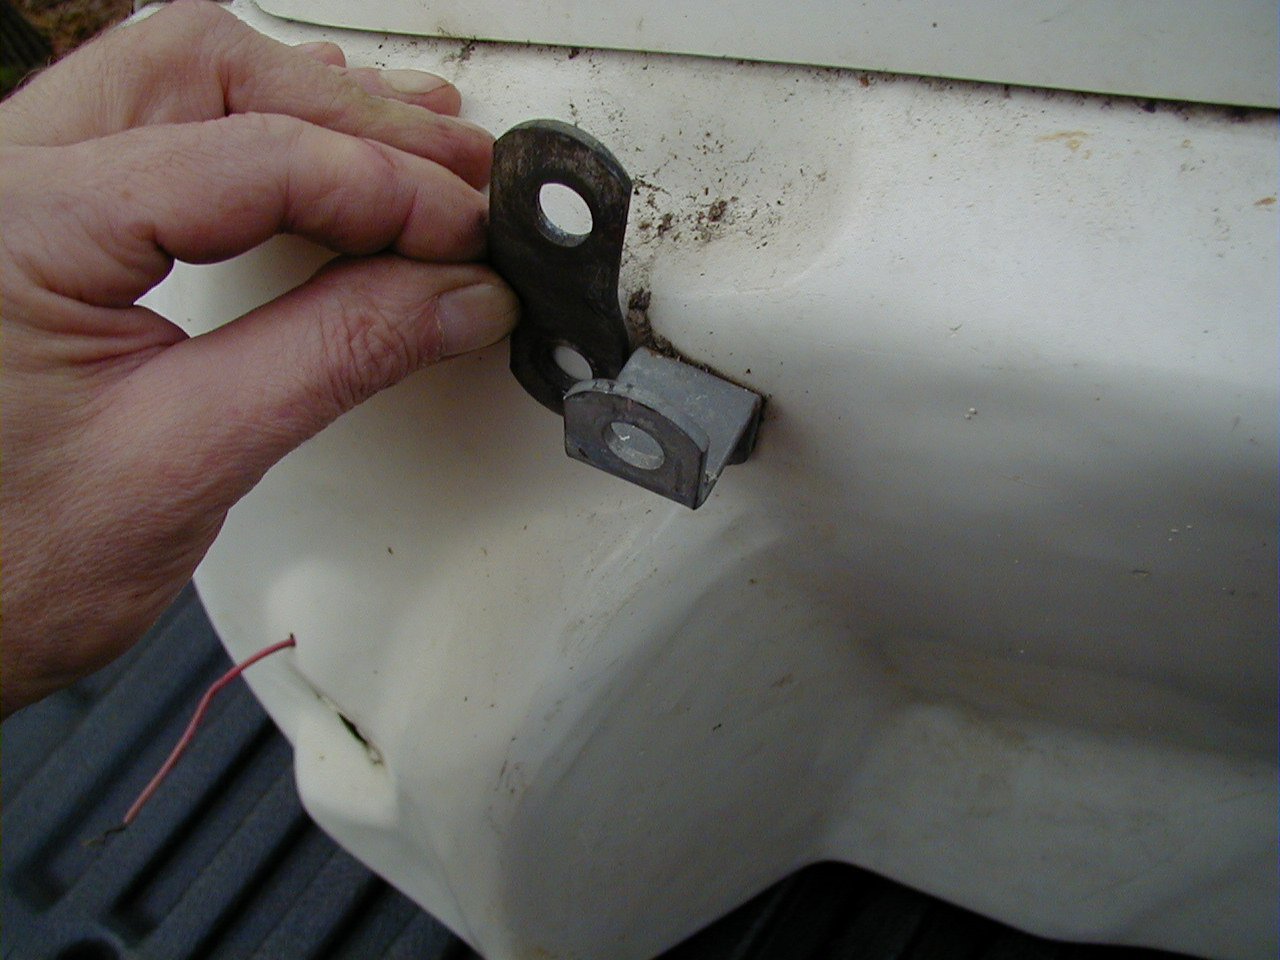 Another view of the upper rear bracket that attaches to an existing hole in the frame. Loop bracket is being held by Charley; Tonti bracket is secured to the saddlebag.